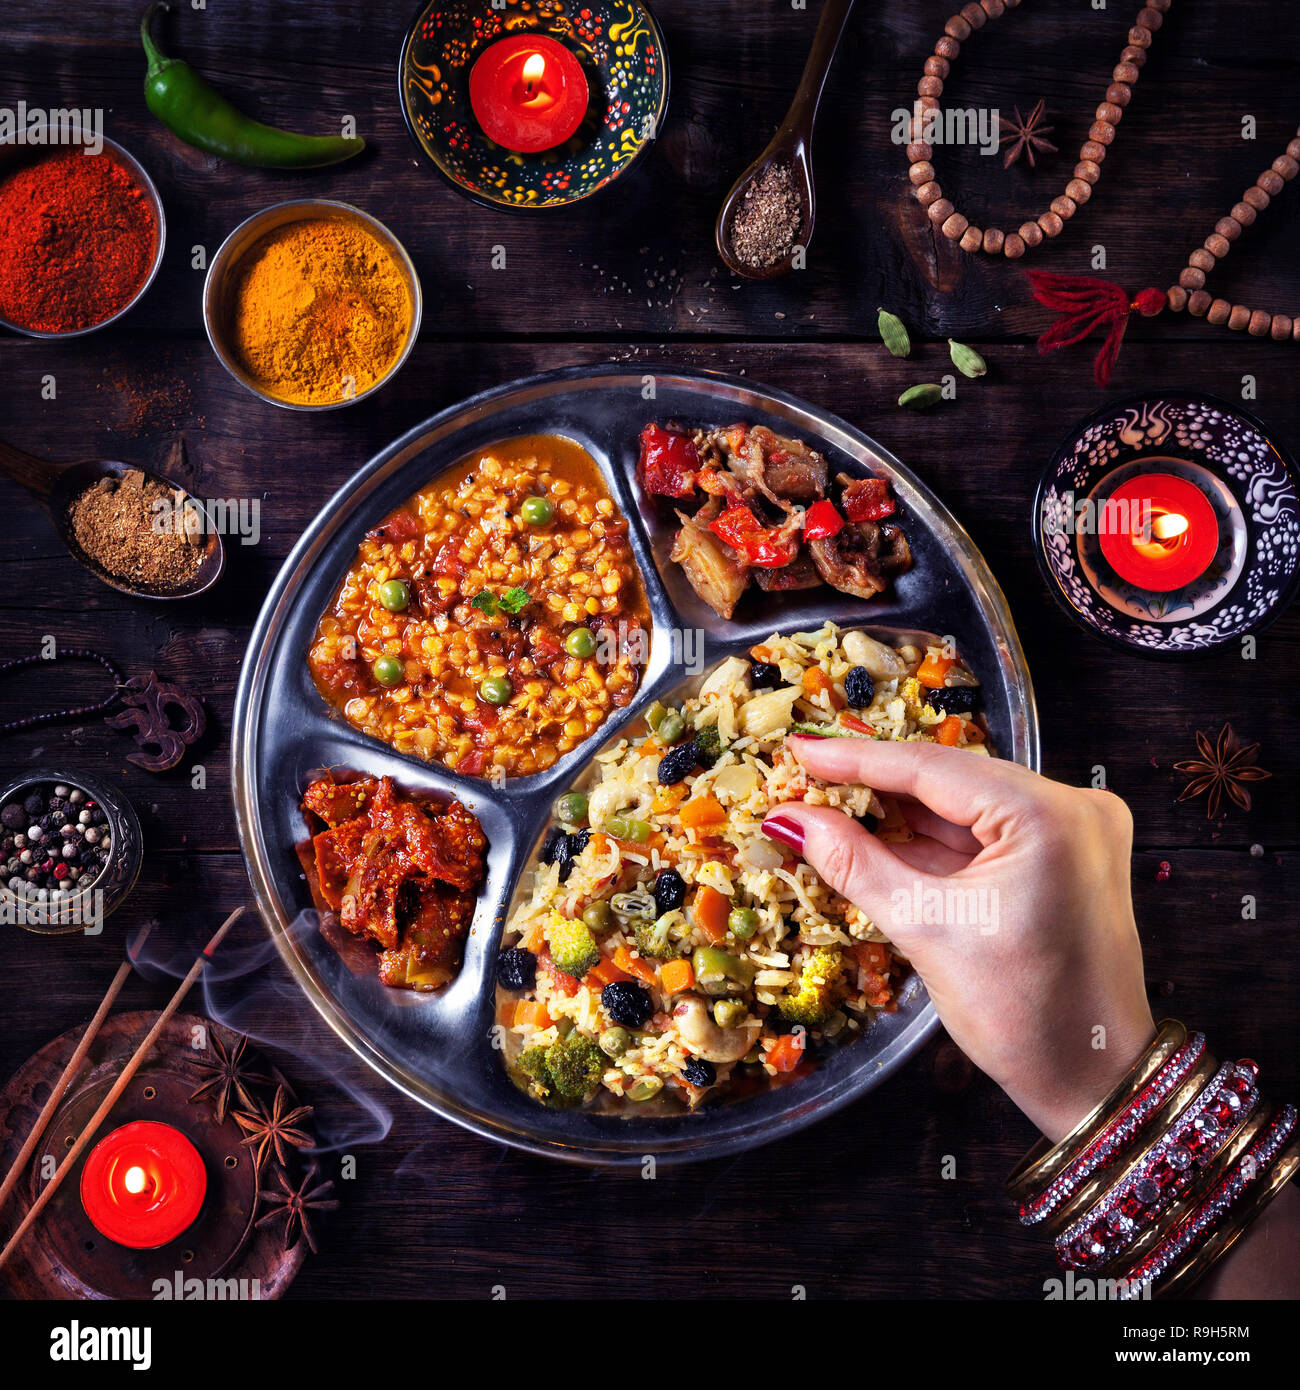 Woman eating vegetarian biryani by her hand with bangles near candles, incense and religious symbols at Diwali celebration Stock Photo